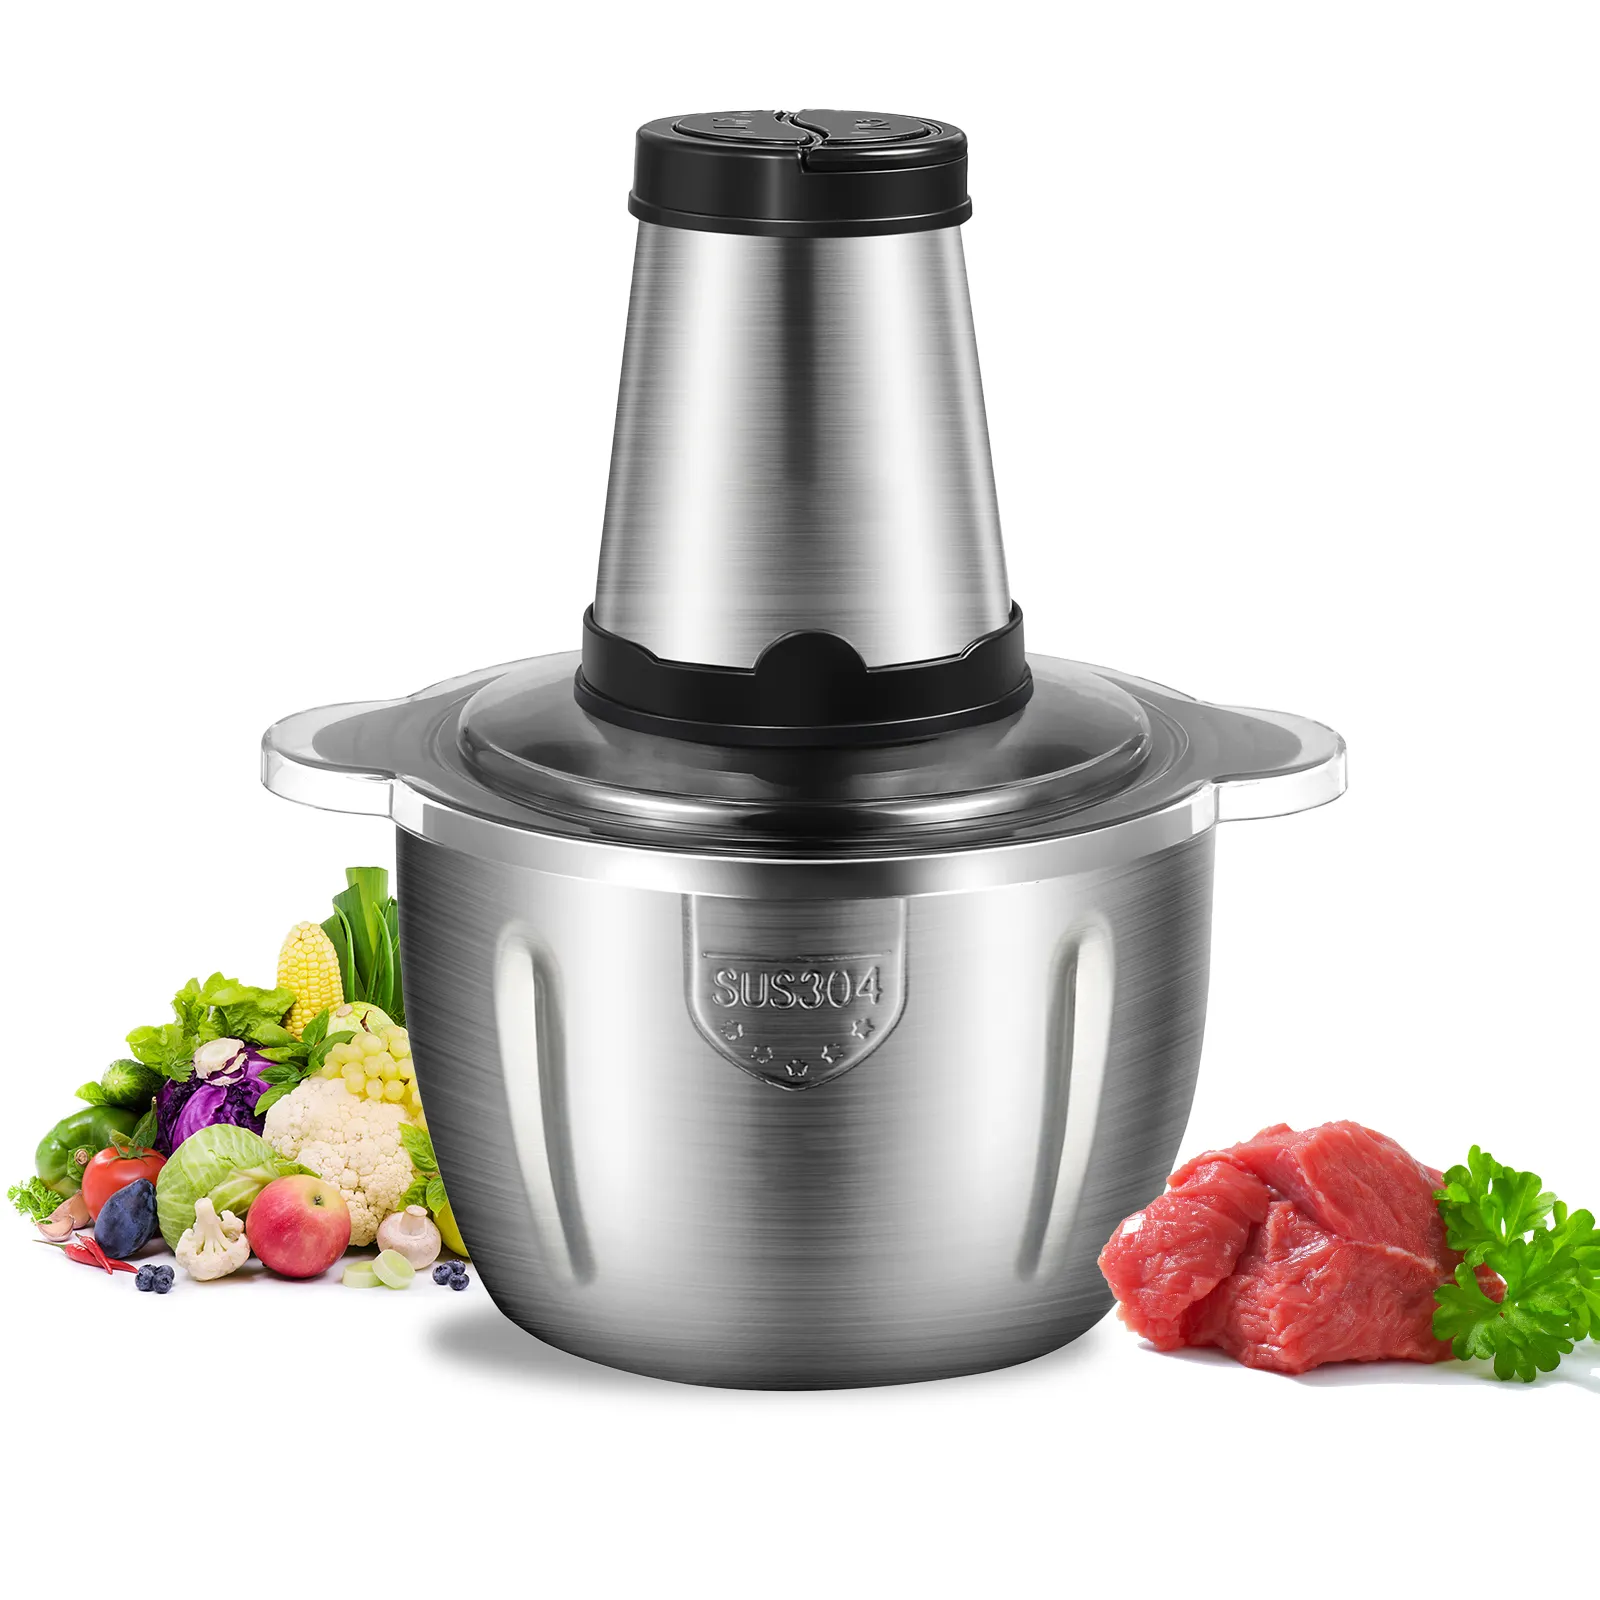 New Product Hot Selling Household Small Electrical Appliances Kitchen Multi-function Vegetable Meat Grinder